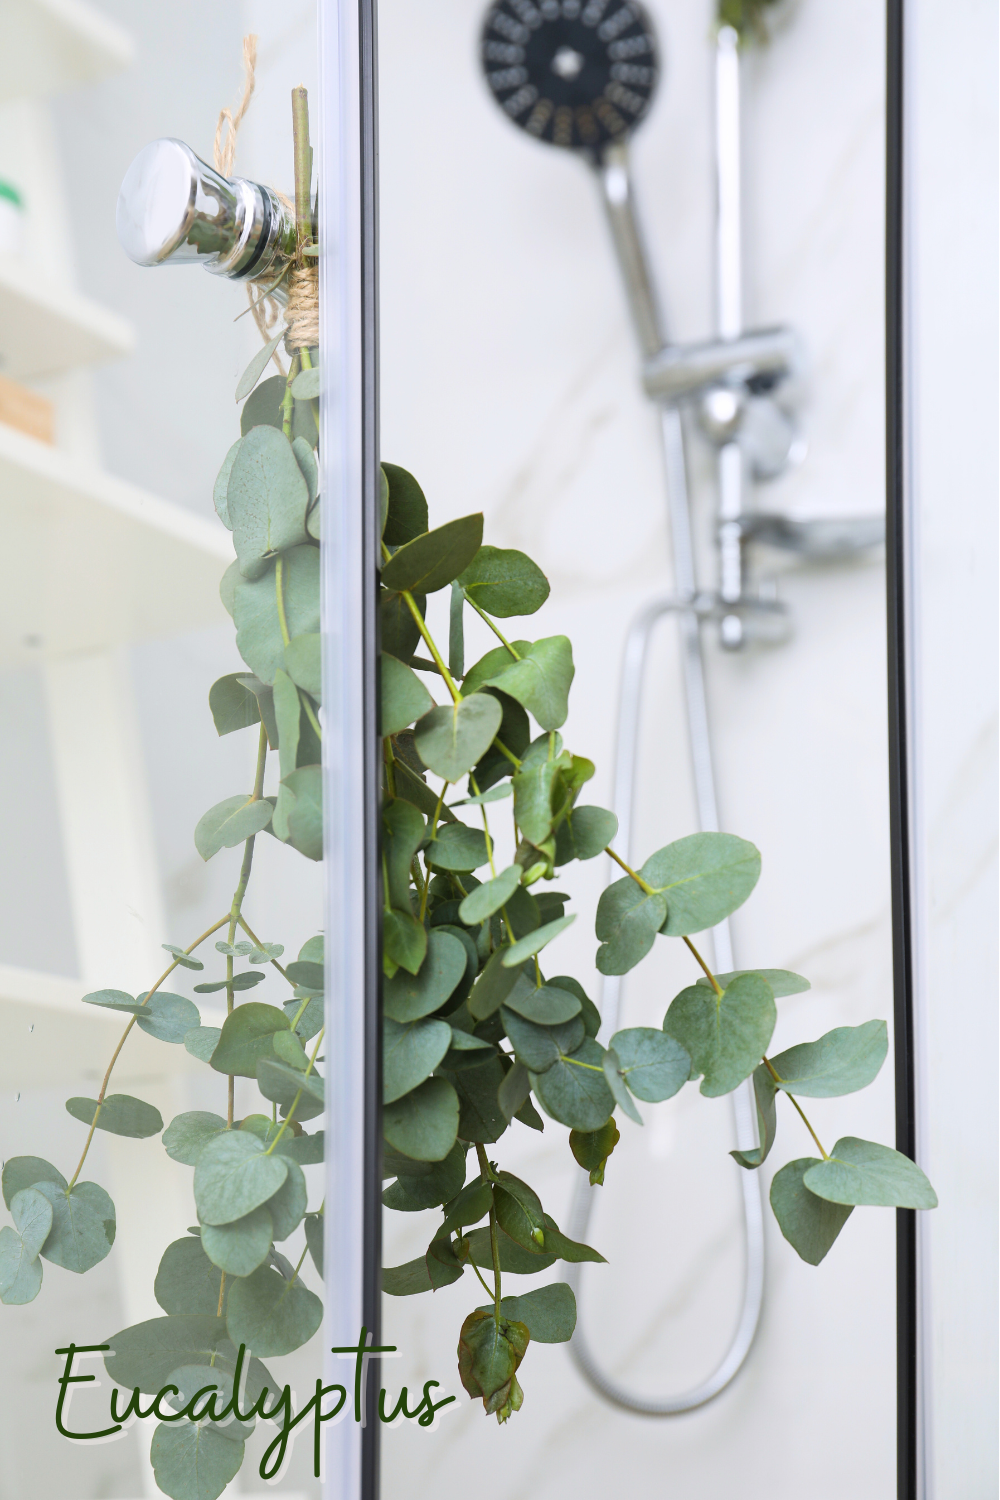 A picture of a eucalyptus plant hanging in a shower.